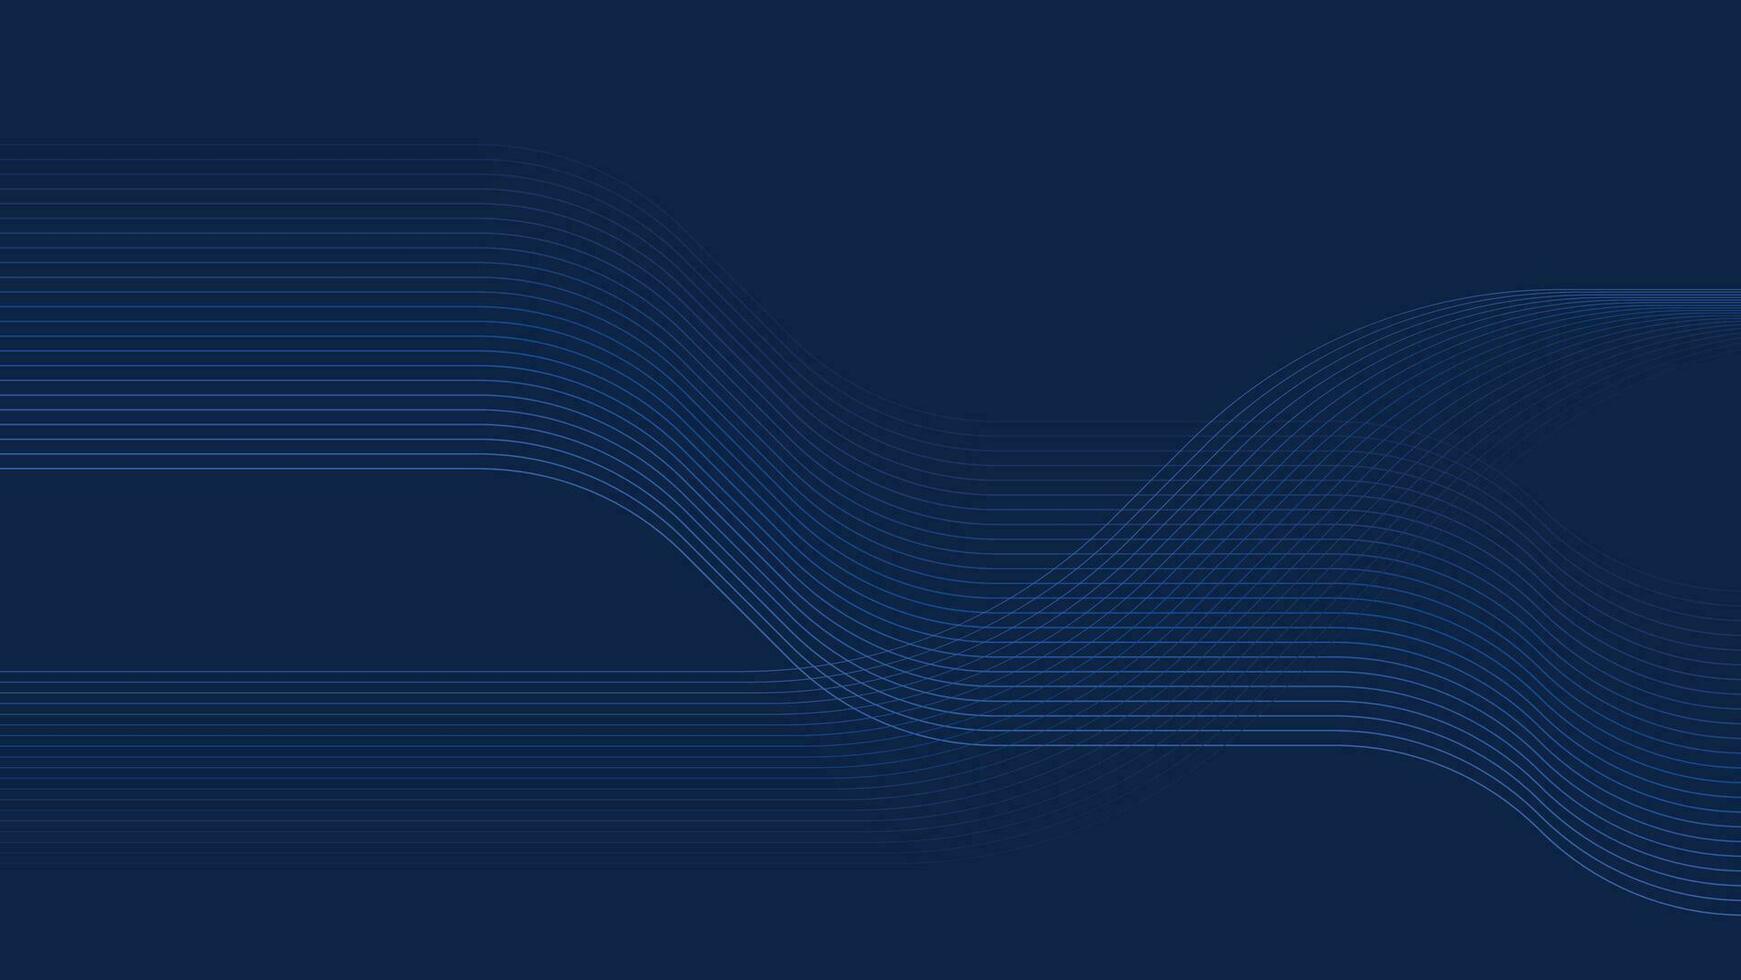 abstract blue background with modern lines pattern vector